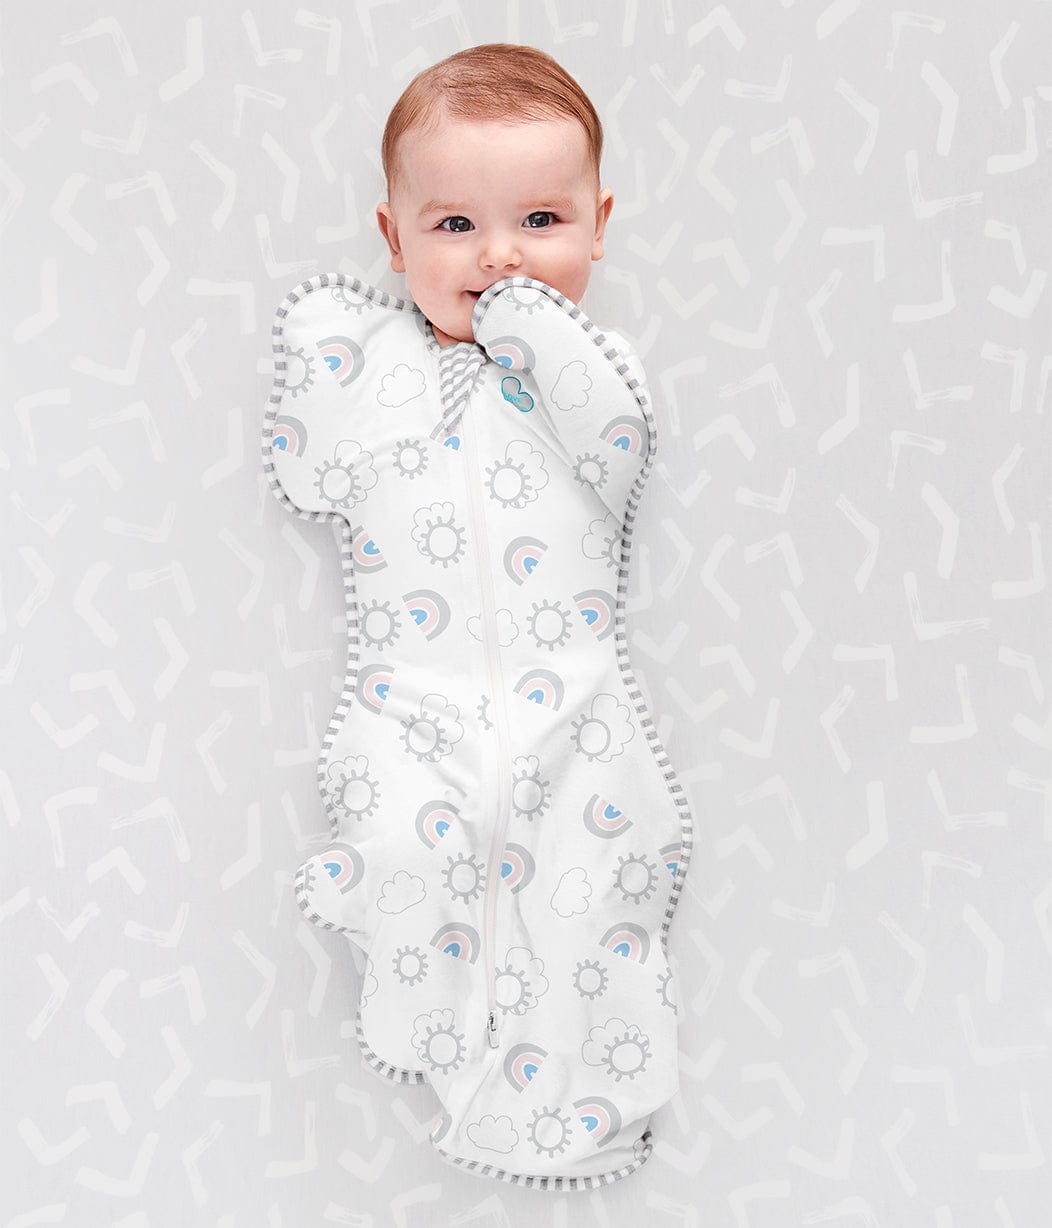 Love To Dream Swaddle Up™ Cotton All Seasons • Cheeky Rascals